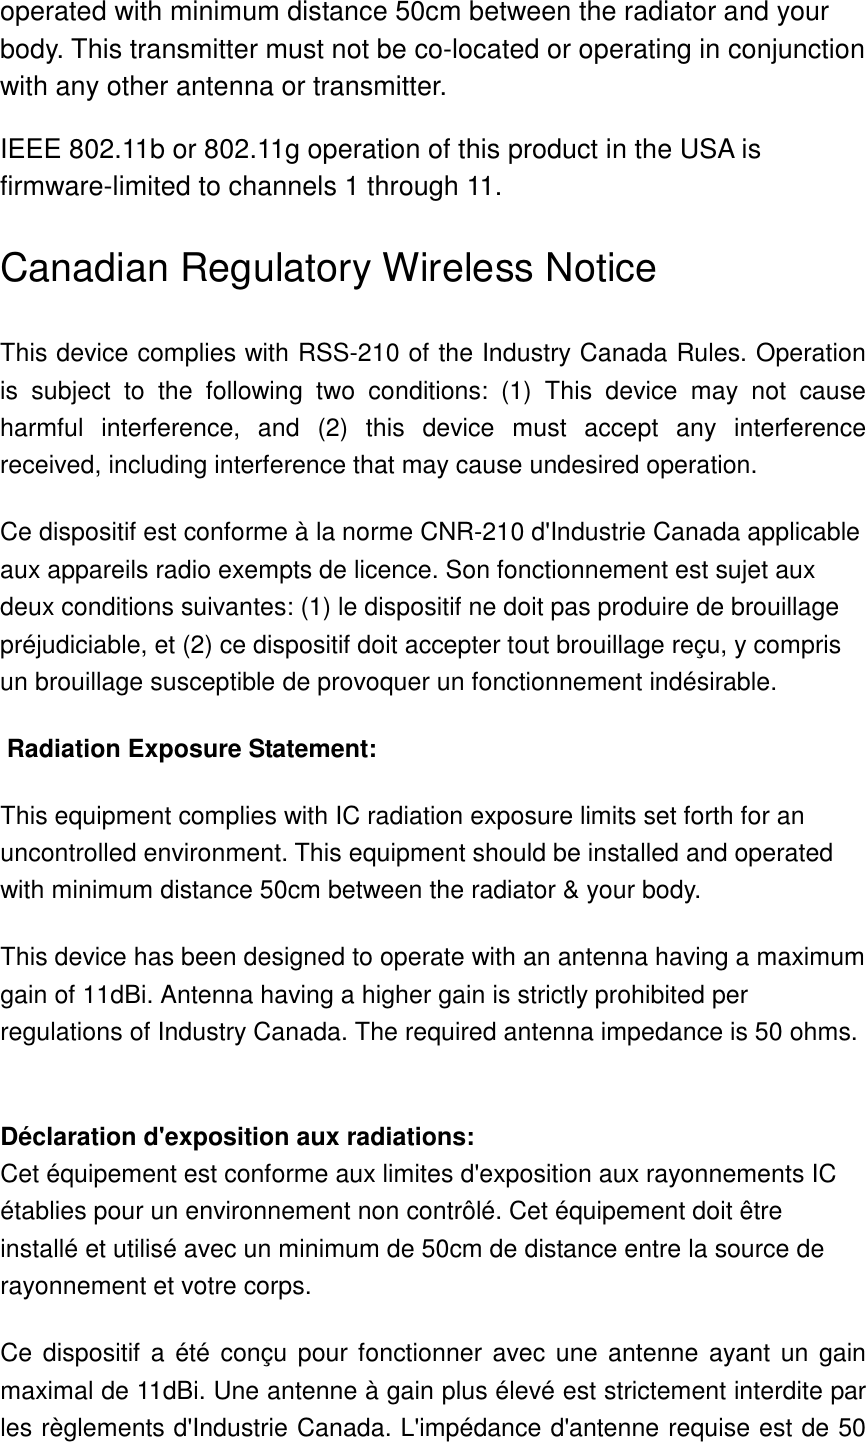 operated with minimum distance 50cm between the radiator and your body. This transmitter must not be co-located or operating in conjunction with any other antenna or transmitter. IEEE 802.11b or 802.11g operation of this product in the USA is firmware-limited to channels 1 through 11. Canadian Regulatory Wireless Notice This device complies with RSS-210 of the Industry Canada Rules. Operation is  subject  to  the  following  two  conditions:  (1)  This  device  may  not  cause harmful  interference,  and  (2)  this  device  must  accept  any  interference received, including interference that may cause undesired operation. Ce dispositif est conforme à la norme CNR-210 d&apos;Industrie Canada applicable aux appareils radio exempts de licence. Son fonctionnement est sujet aux deux conditions suivantes: (1) le dispositif ne doit pas produire de brouillage préjudiciable, et (2) ce dispositif doit accepter tout brouillage reçu, y compris un brouillage susceptible de provoquer un fonctionnement indésirable.  Radiation Exposure Statement: This equipment complies with IC radiation exposure limits set forth for an uncontrolled environment. This equipment should be installed and operated with minimum distance 50cm between the radiator &amp; your body. This device has been designed to operate with an antenna having a maximum gain of 11dBi. Antenna having a higher gain is strictly prohibited per regulations of Industry Canada. The required antenna impedance is 50 ohms.  Déclaration d&apos;exposition aux radiations: Cet équipement est conforme aux limites d&apos;exposition aux rayonnements IC établies pour un environnement non contrôlé. Cet équipement doit être installé et utilisé avec un minimum de 50cm de distance entre la source de rayonnement et votre corps. Ce dispositif a  été conçu  pour fonctionner  avec une  antenne ayant un gain maximal de 11dBi. Une antenne à gain plus élevé est strictement interdite par les règlements d&apos;Industrie Canada. L&apos;impédance d&apos;antenne requise est de 50 